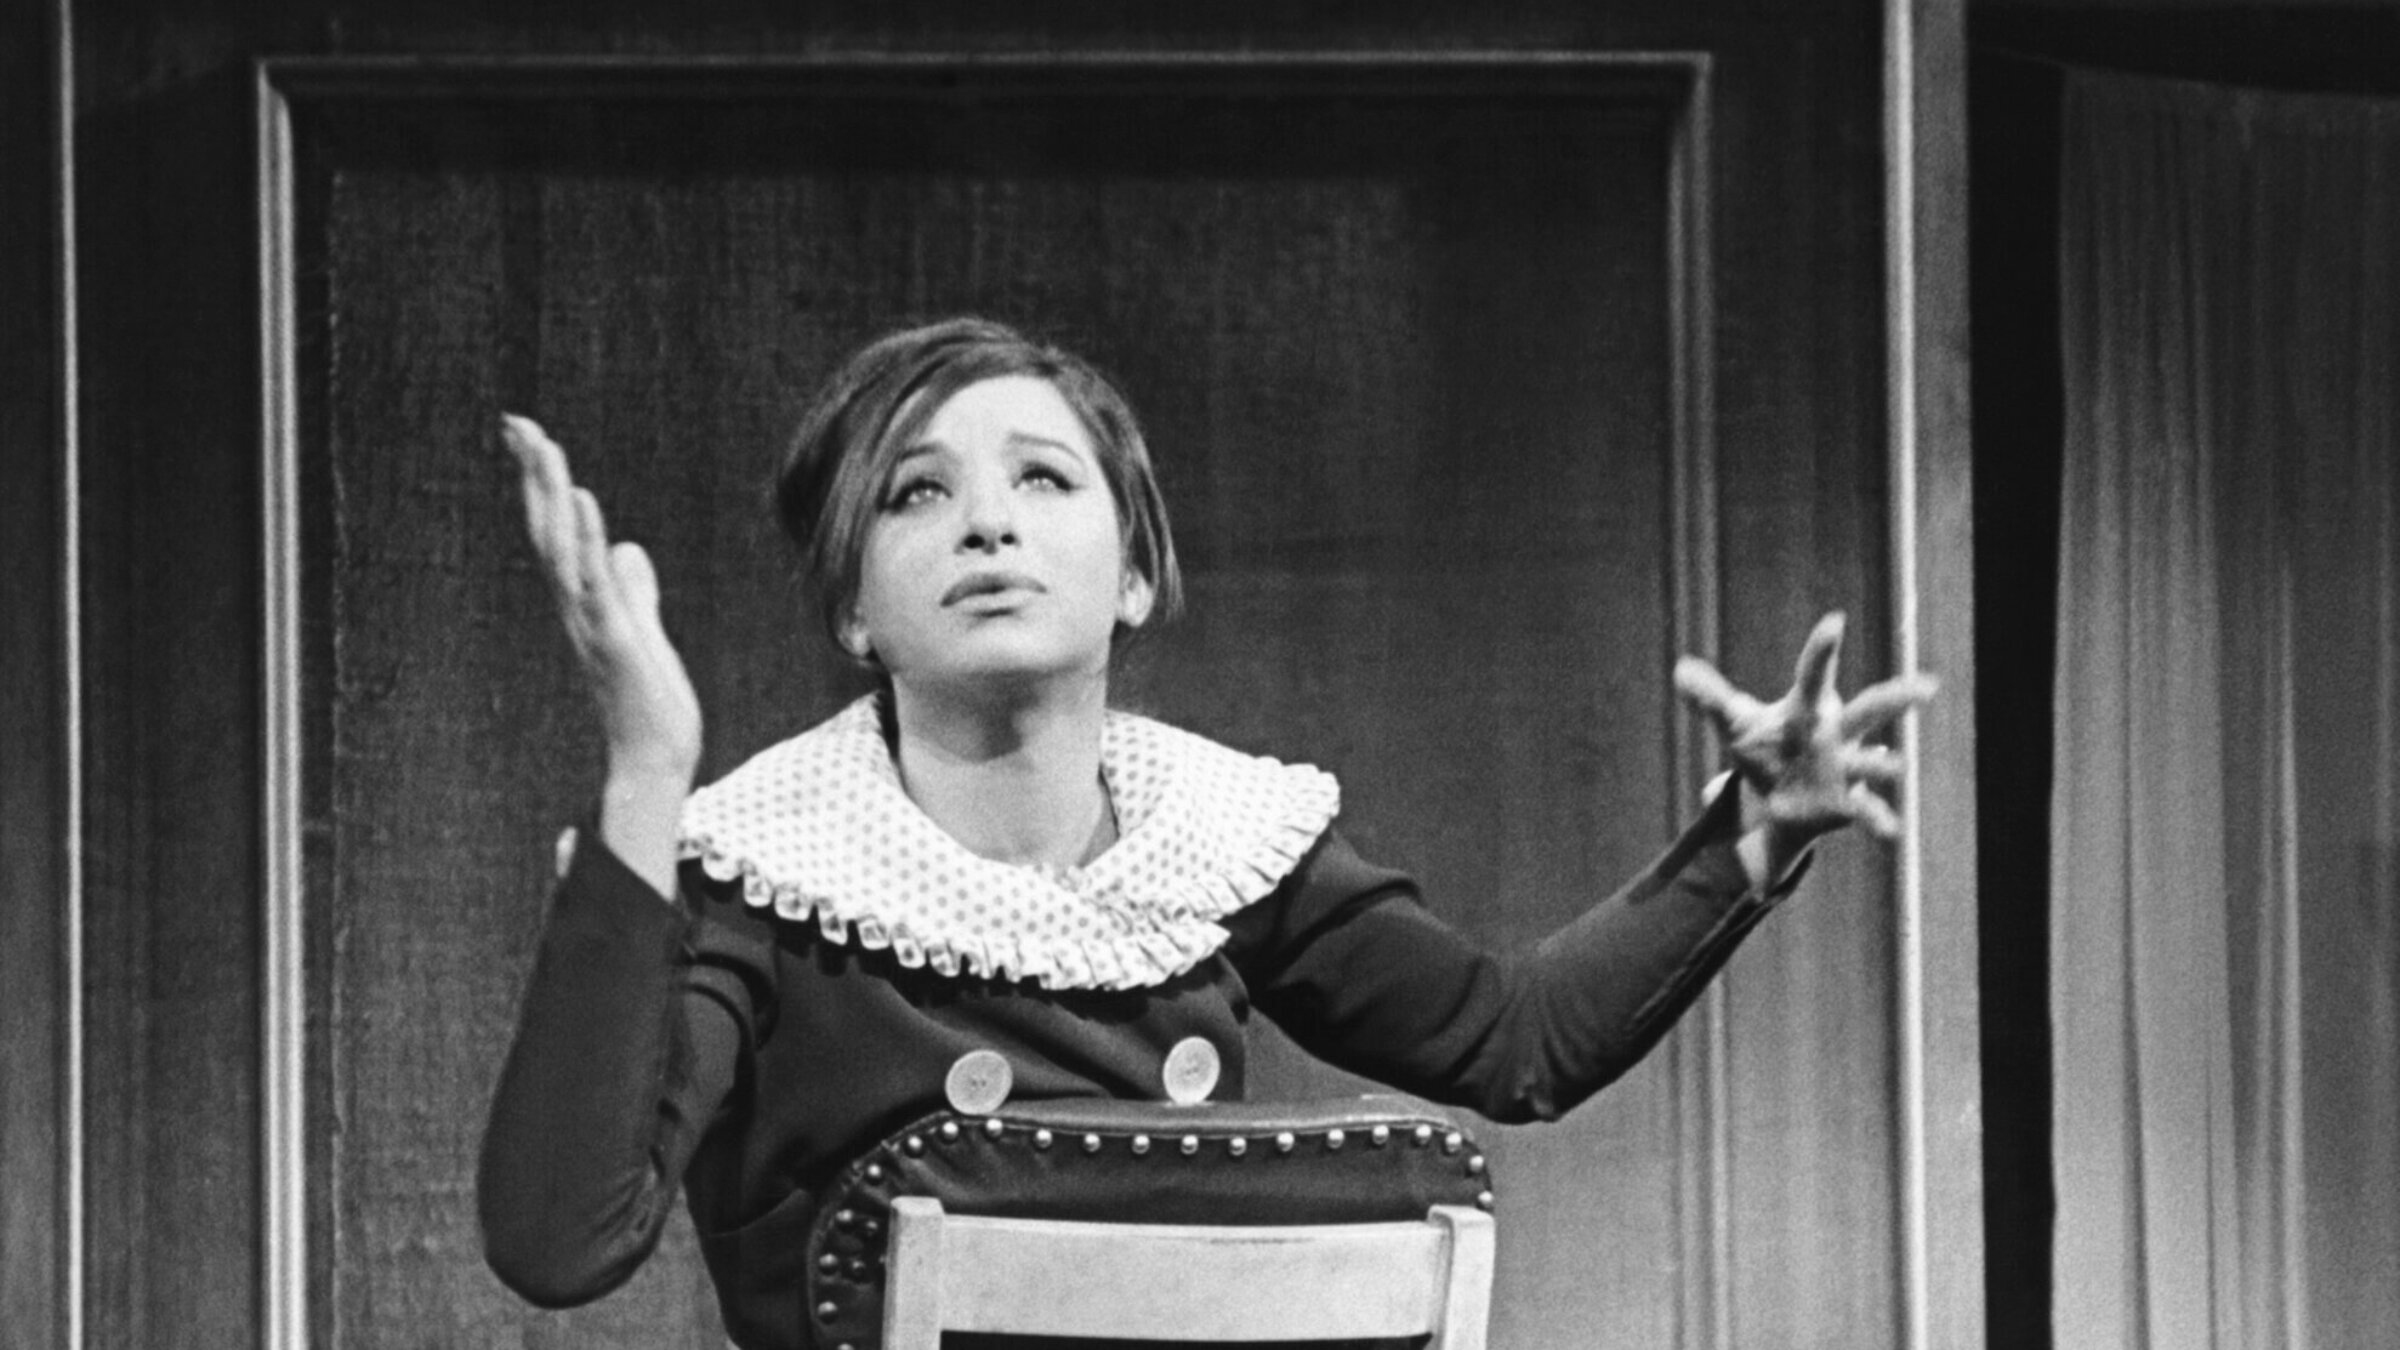  Barbra Streisand making her Broadway debut at 19 in the musical "I Can Get It for You Wholesale" in 1962.